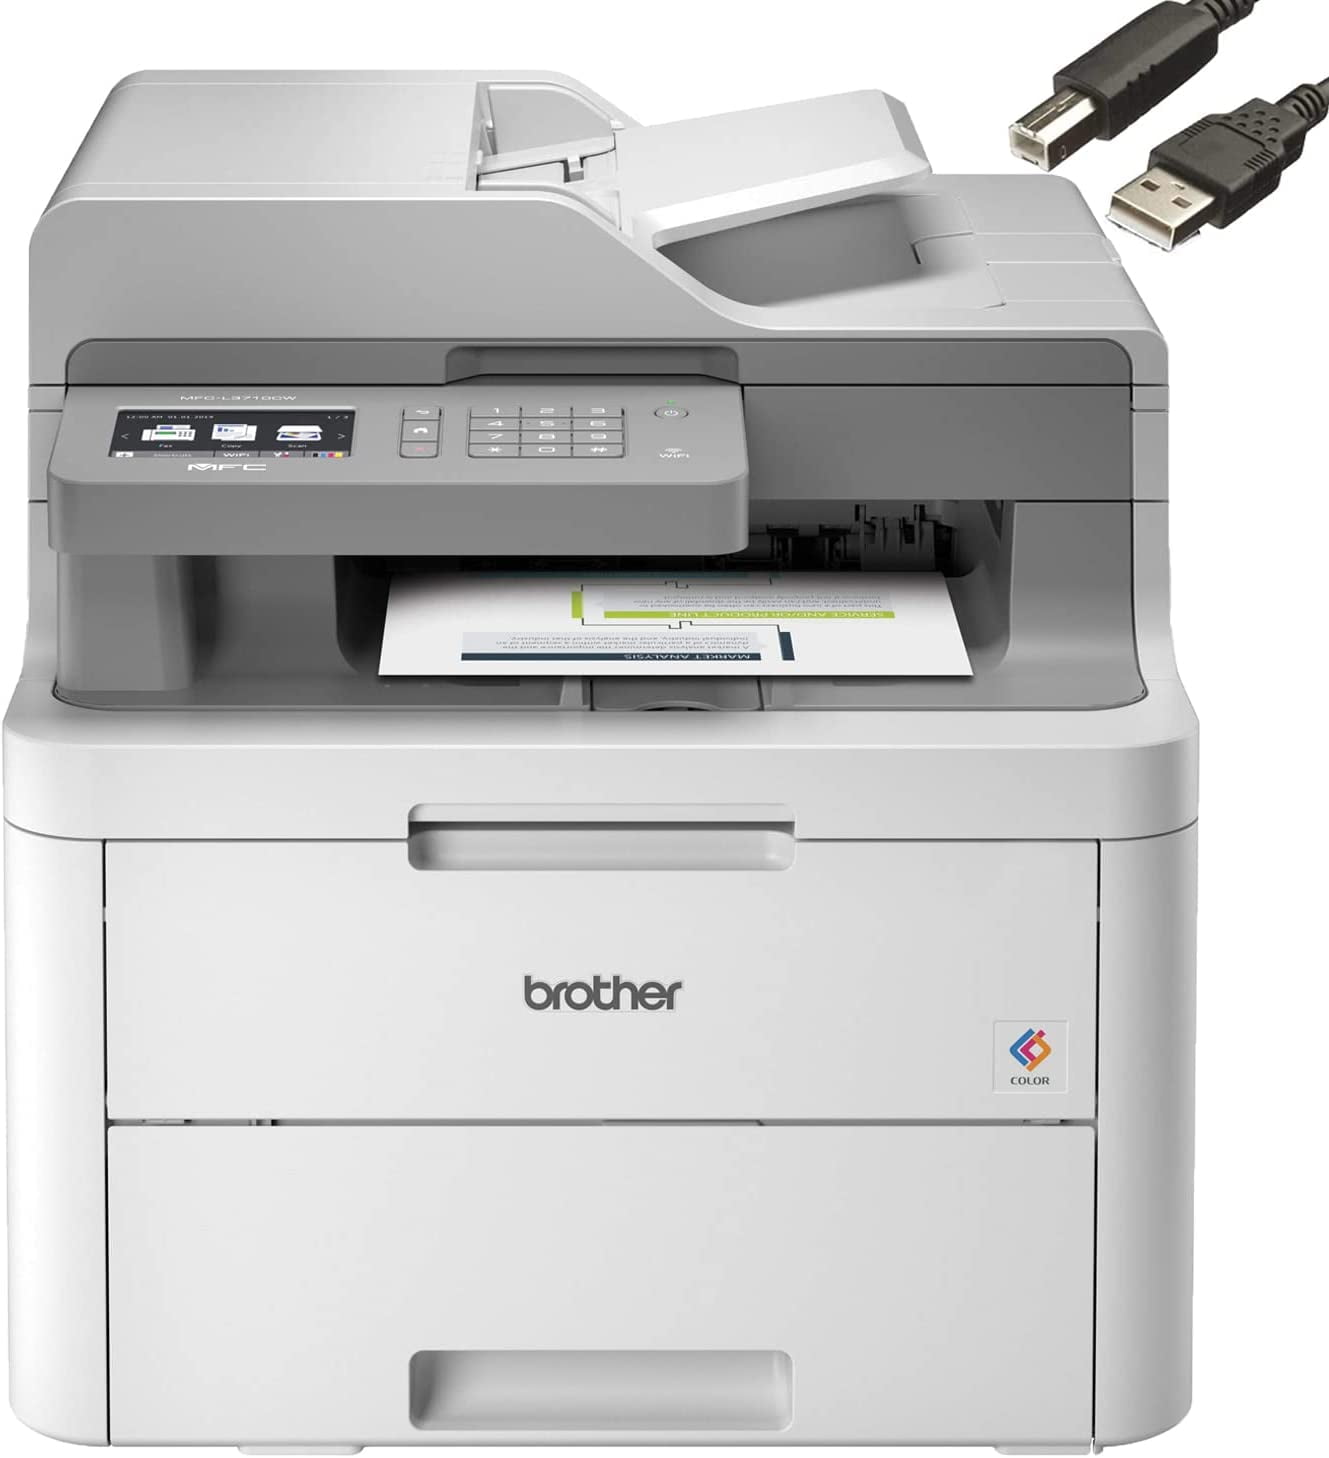 tyveri spørge Økonomi Brother MFC-L3710CW Compact Digital Color All-in-One Laser Printer,  Wireless Printing, Print Scan Copy Fax, Cefesfy Printer Cable - Walmart.com